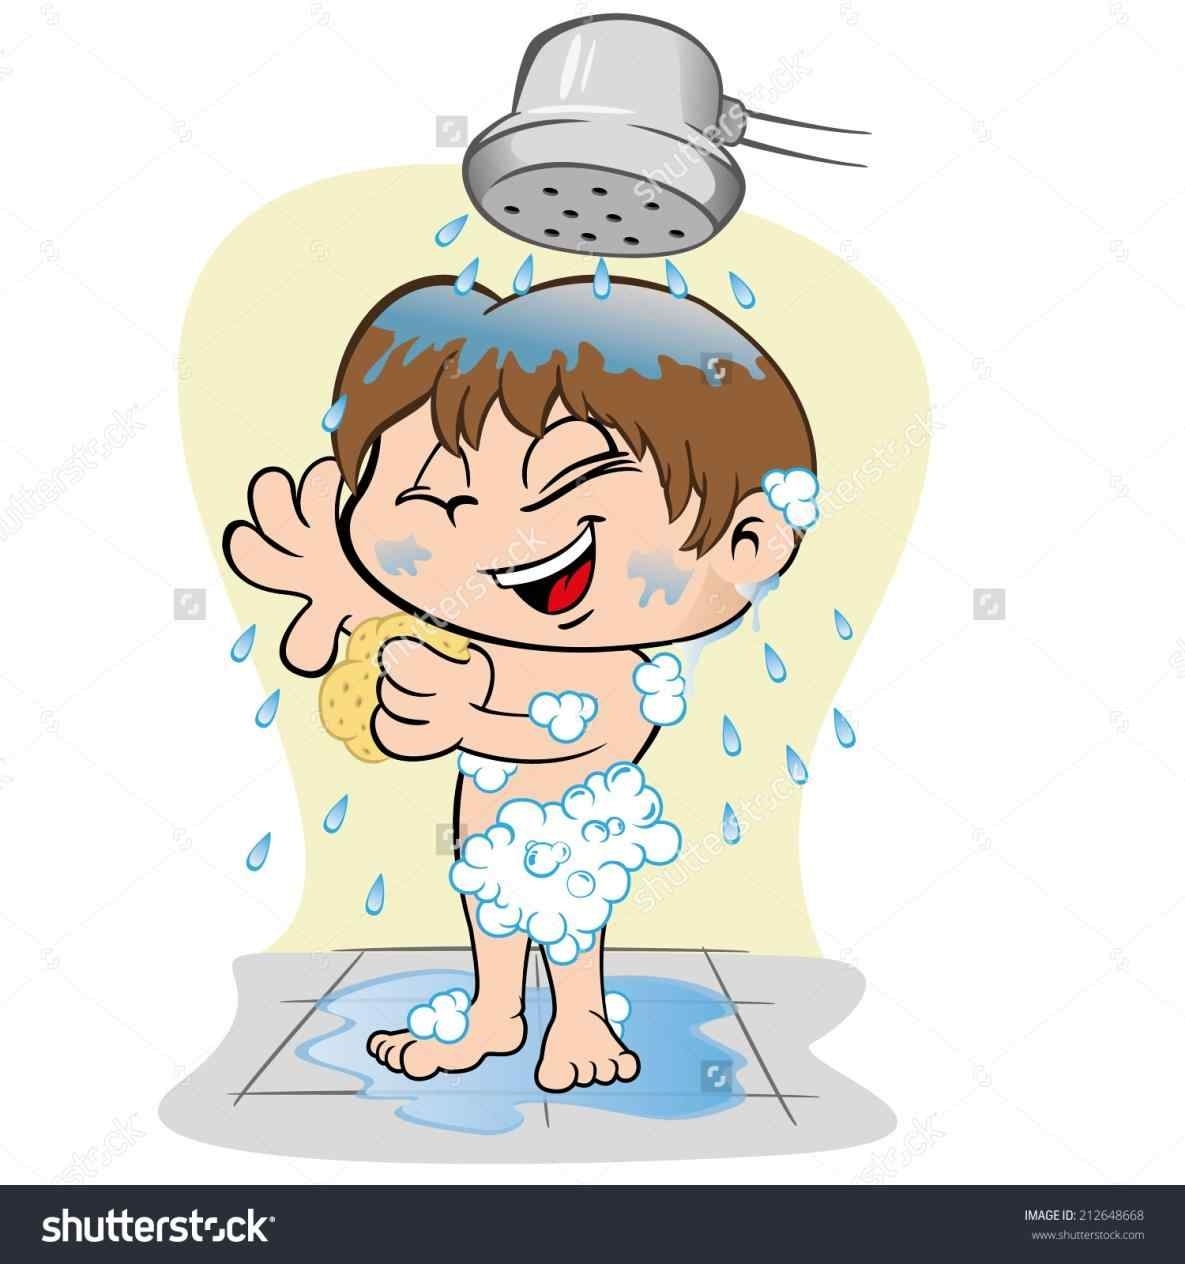 Clip Art The Minute Clean Kids Cleaning Bathroom Clipart Your Room.